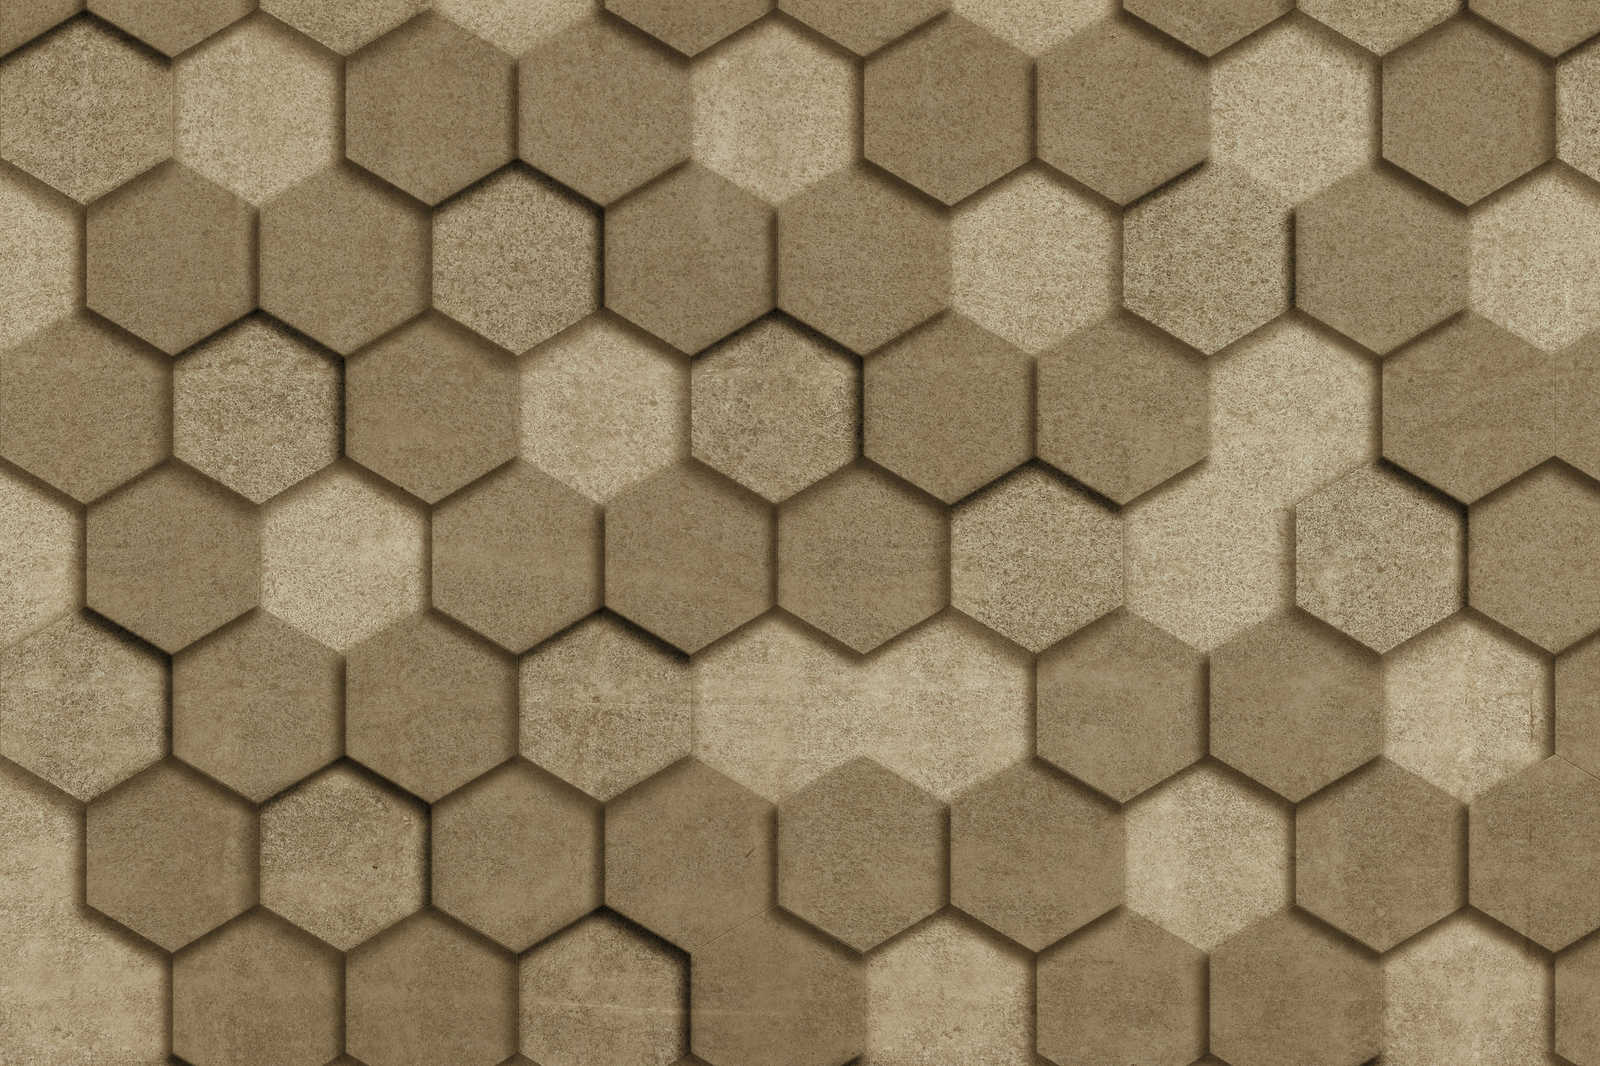             Canvas painting with geometric tiles hexagonal 3D look | gold - 0.90 m x 0.60 m
        